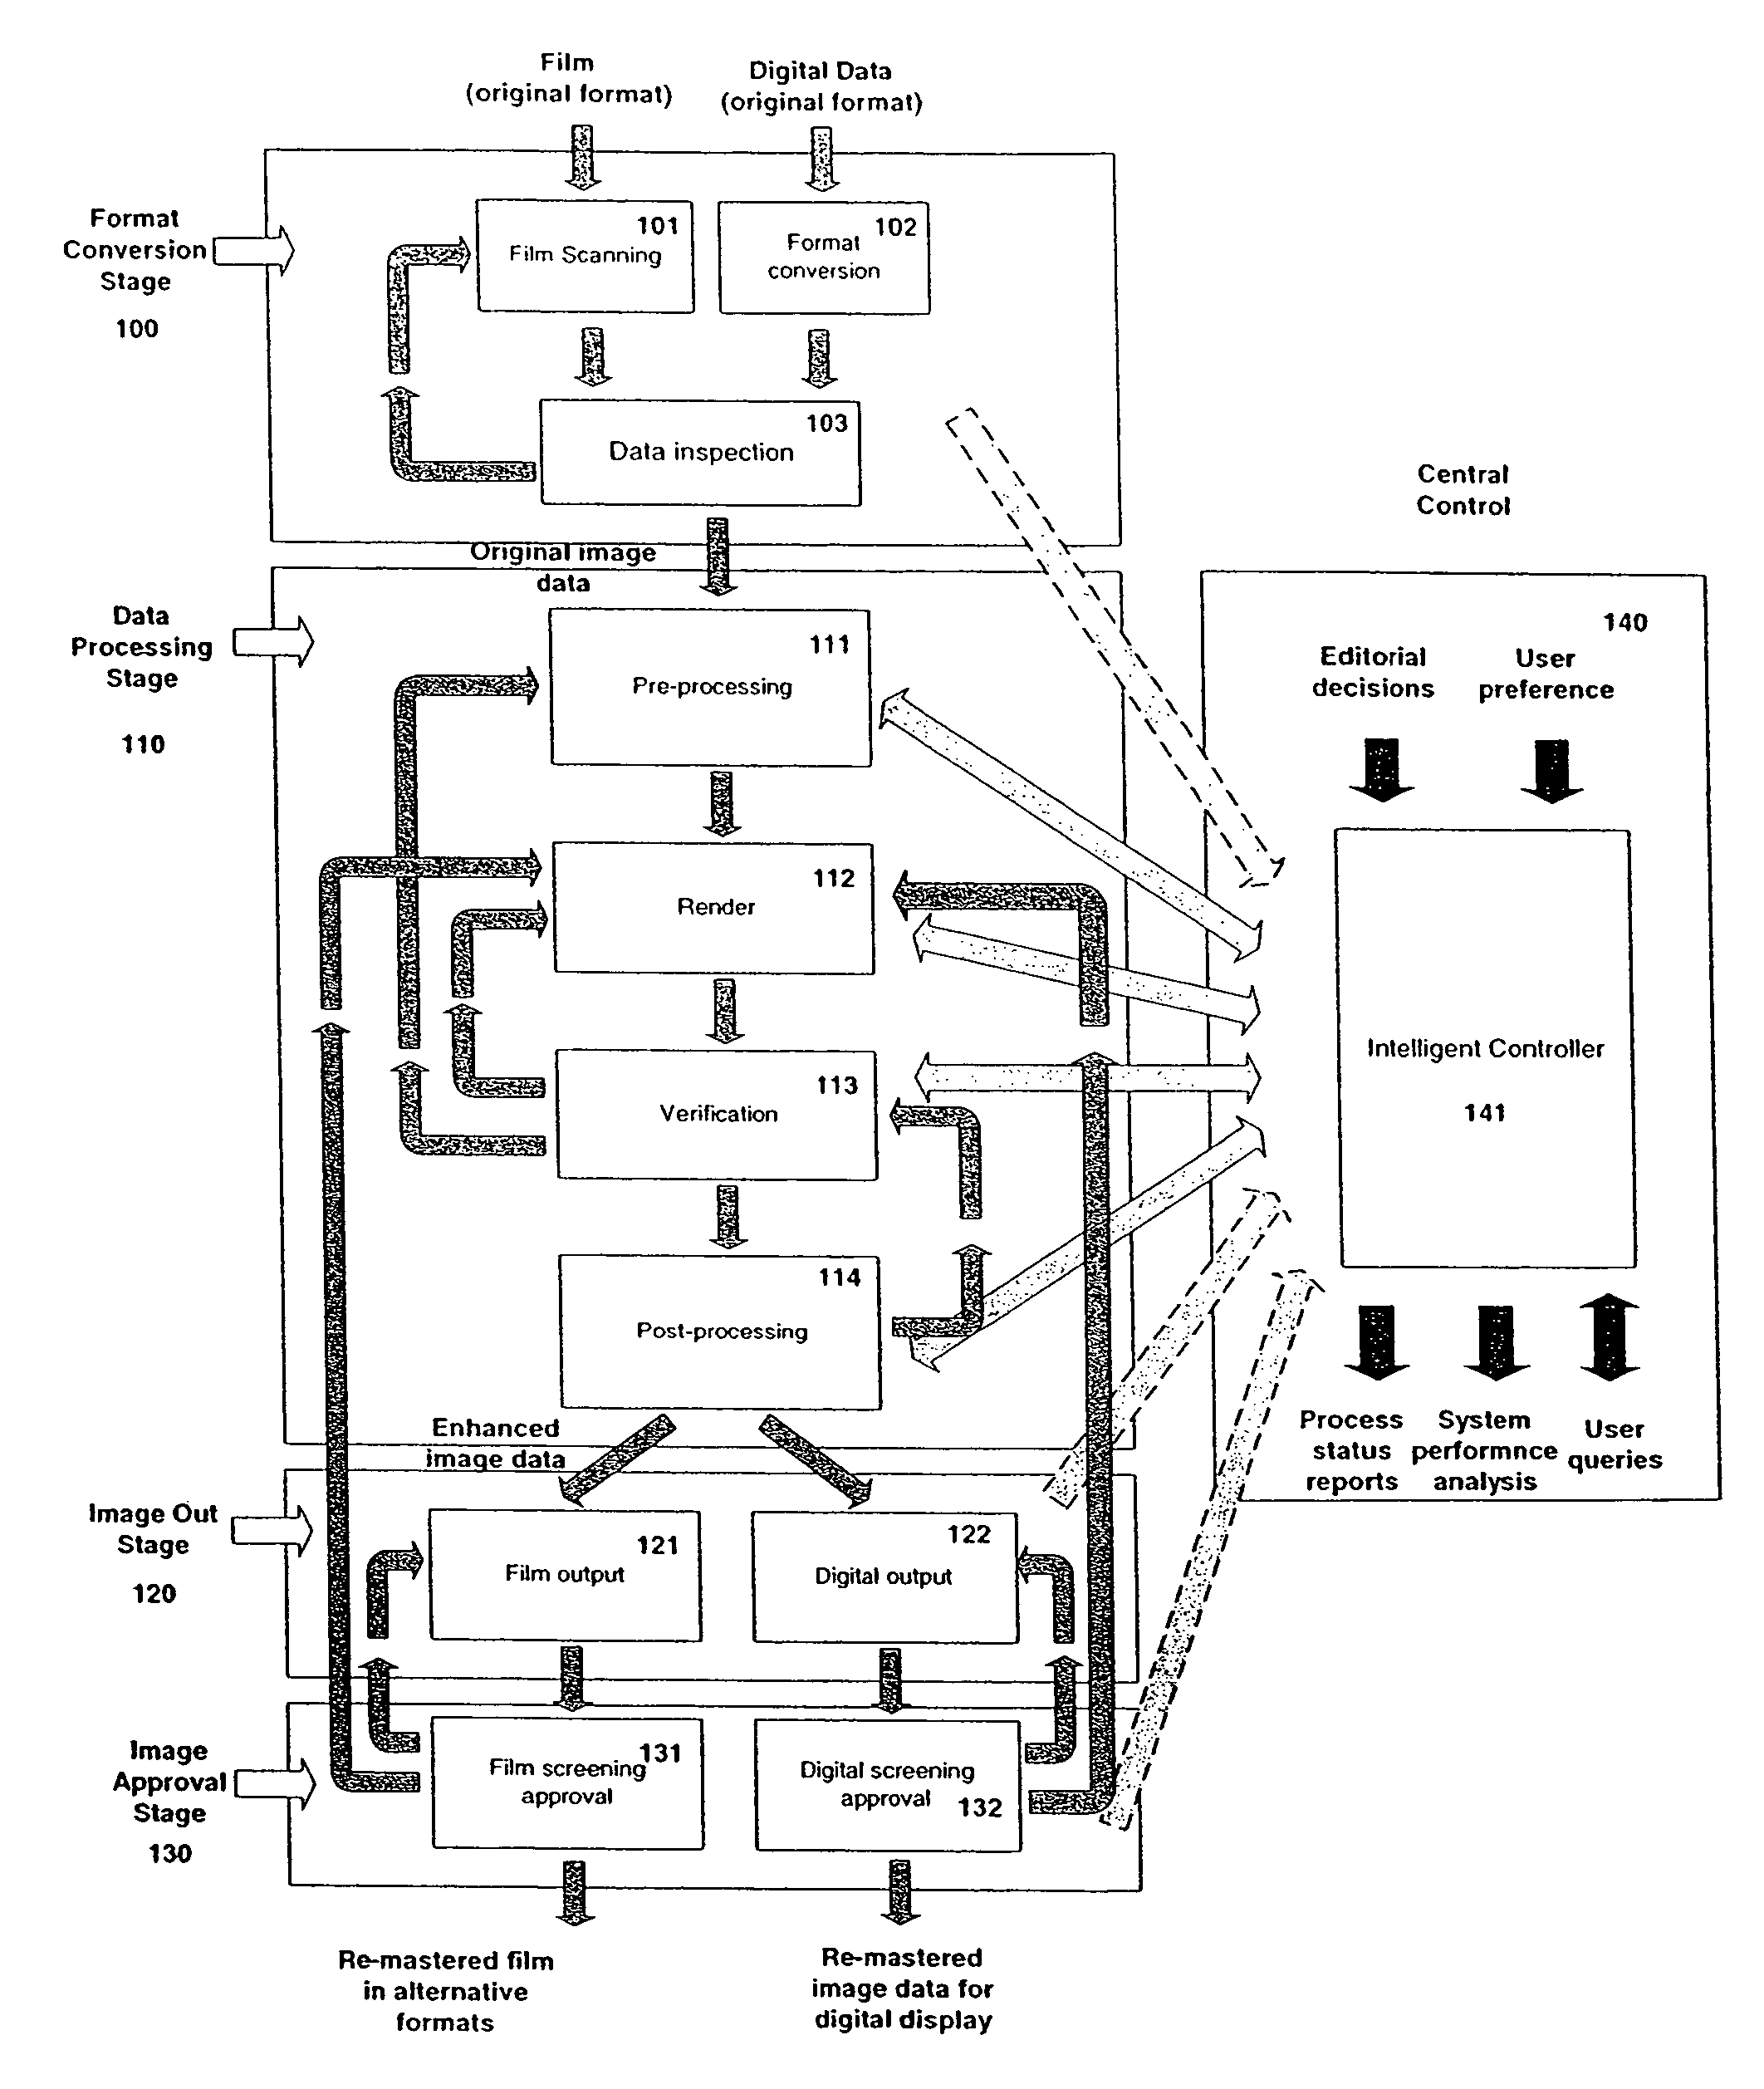 Systems and methods for digitally re-mastering or otherwise modifying motion pictures or other image sequences data